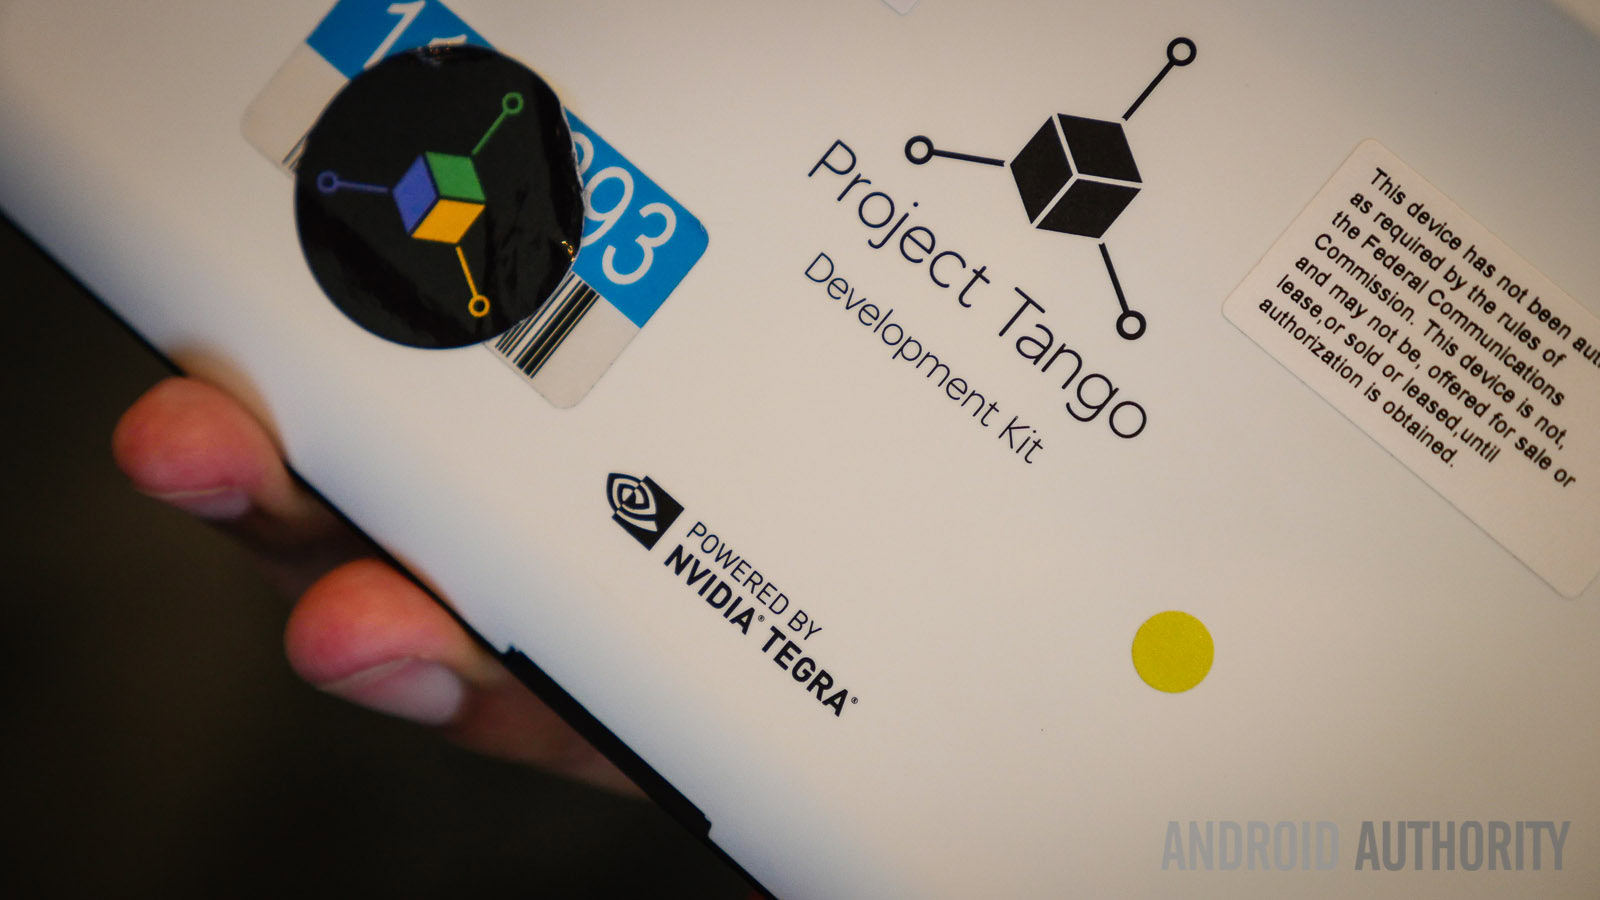 project tango demo (9 of 9)